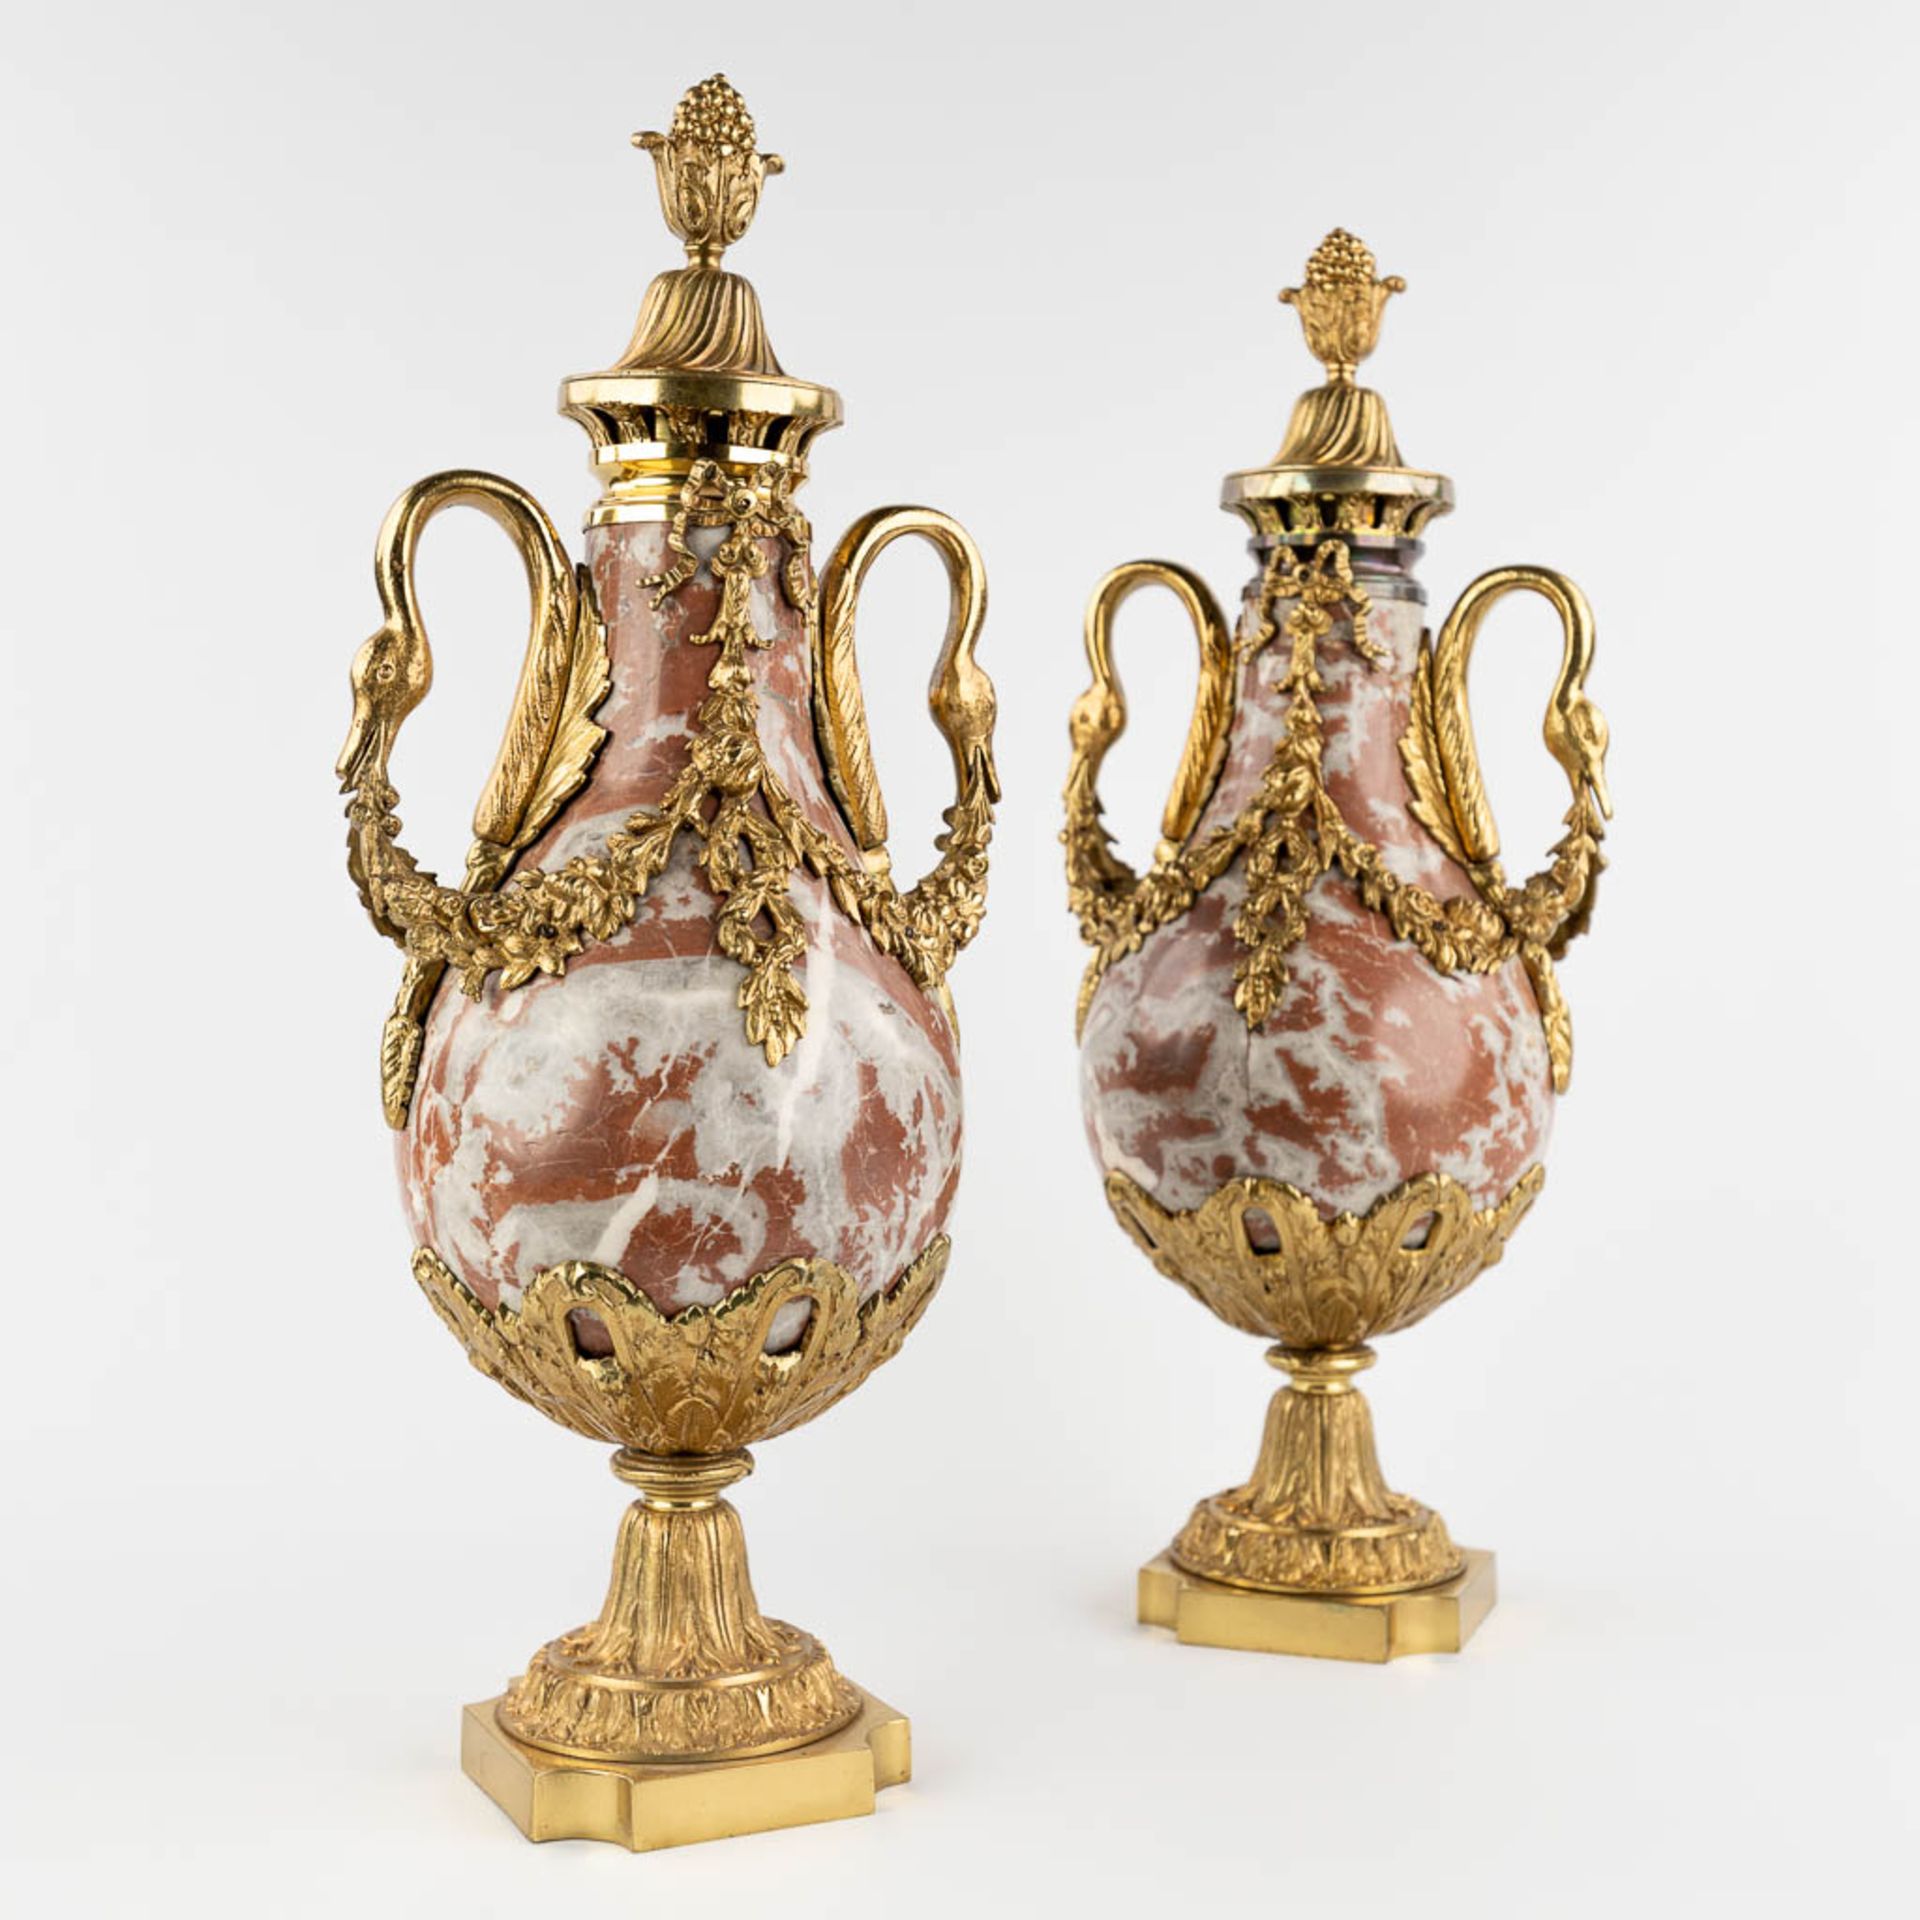 A pair of cassolettes, red and grey marble mounted with bronze in Empire style. (D:18 x W:23 x H:54 